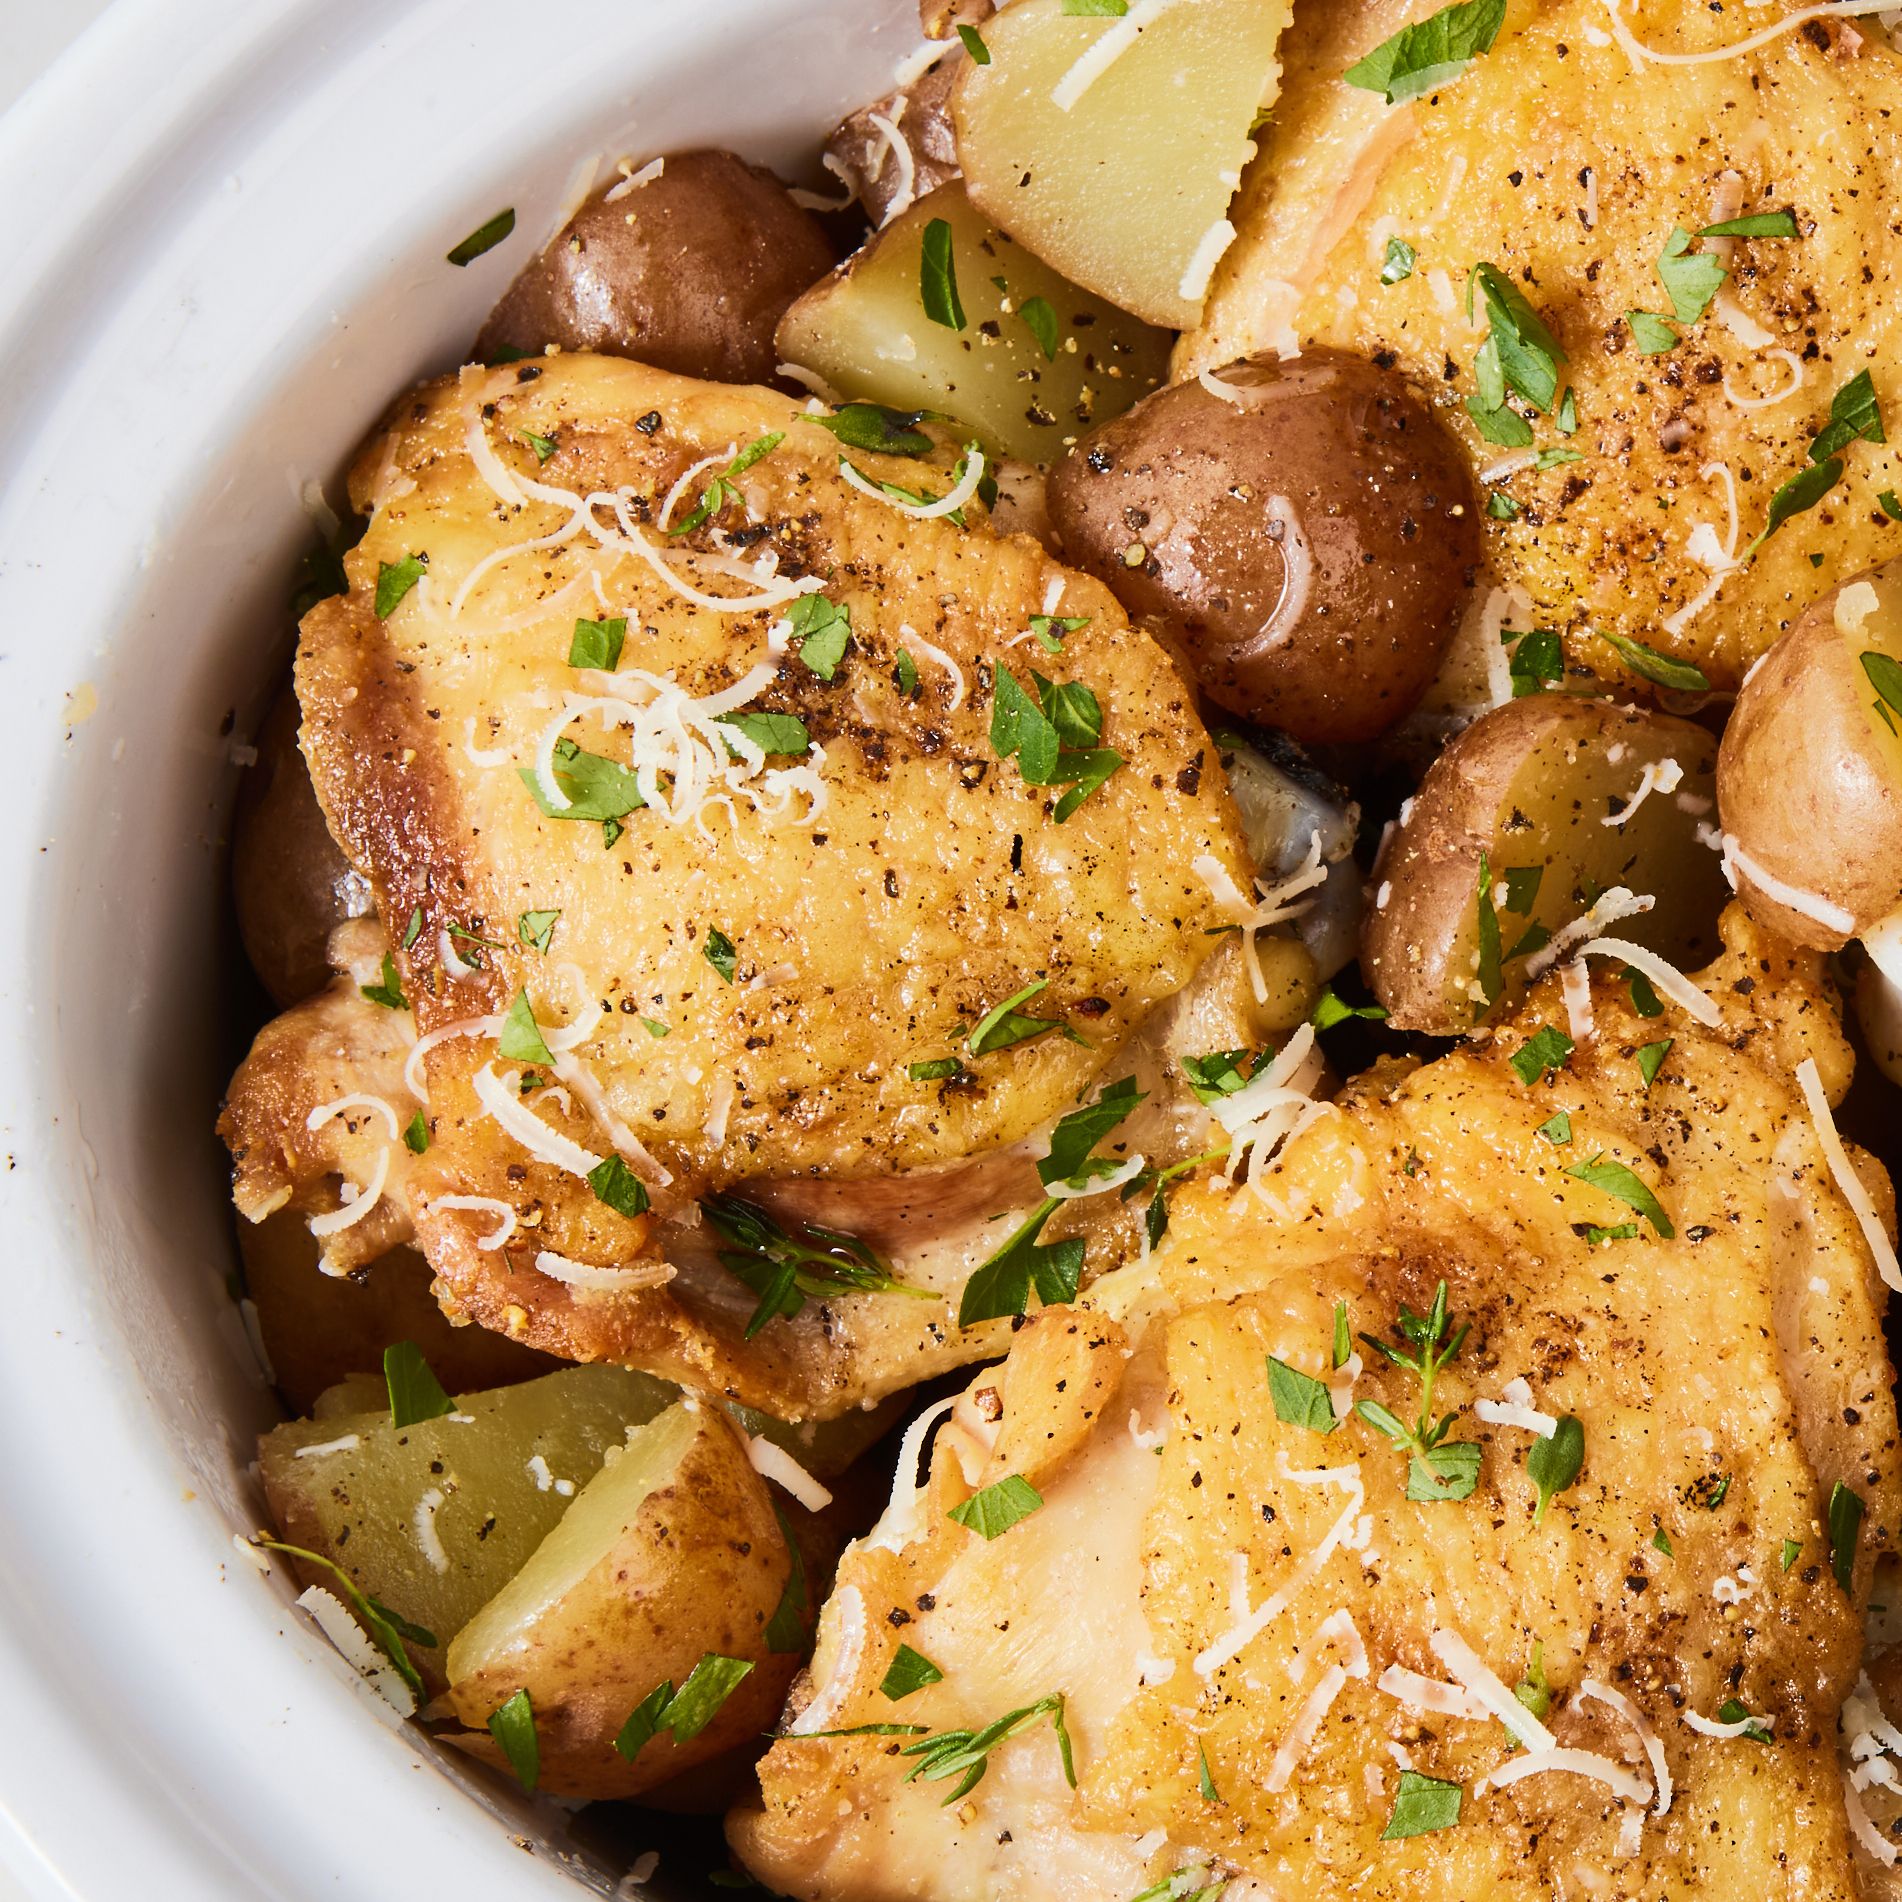 5 Tips to Create Healthier Slow Cooker Meals - Food & Nutrition Magazine